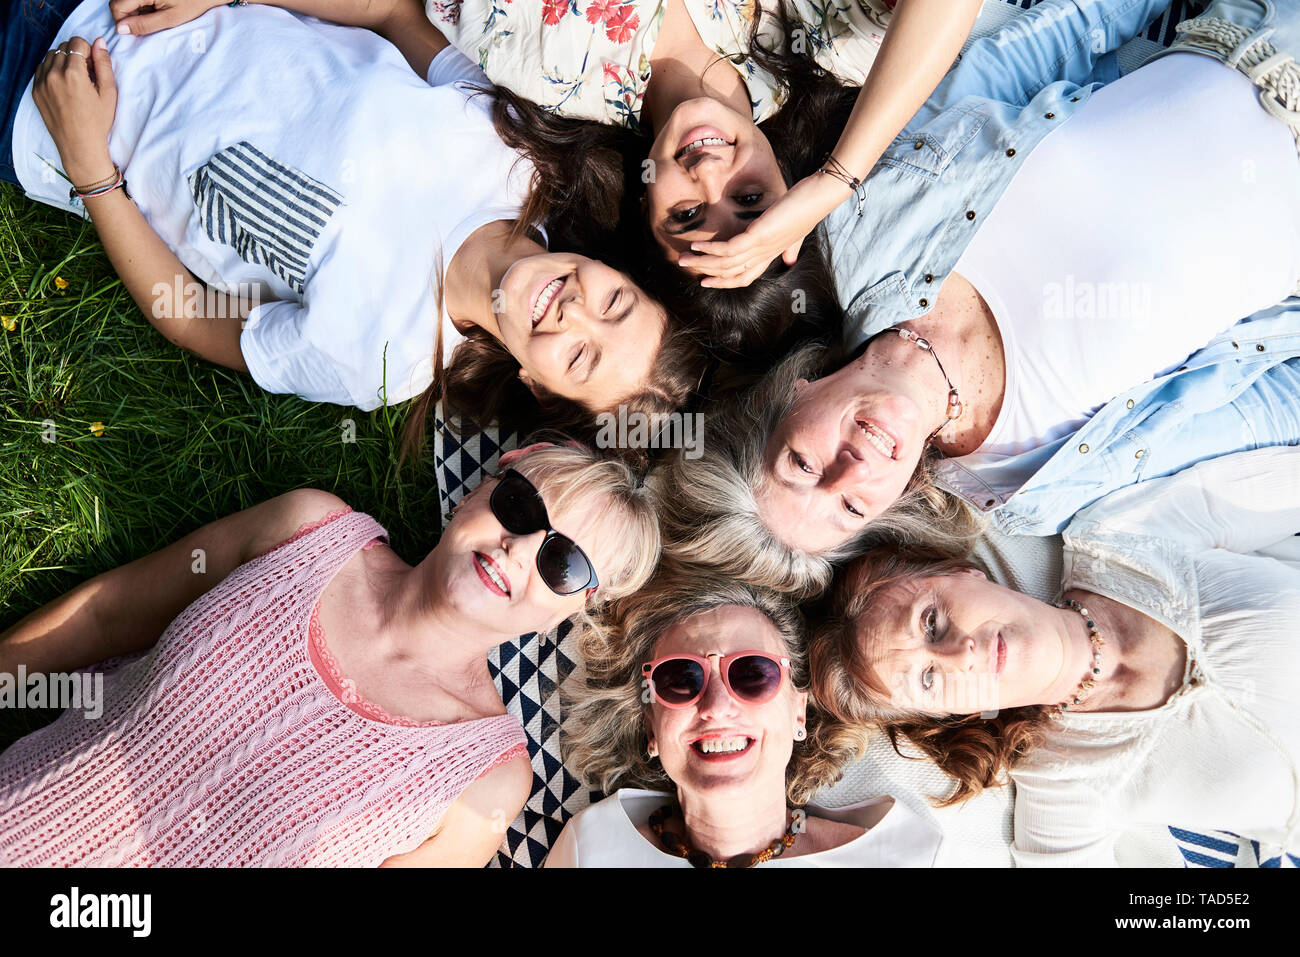 Top view of happy group of women lying in a meadow Stock Photo